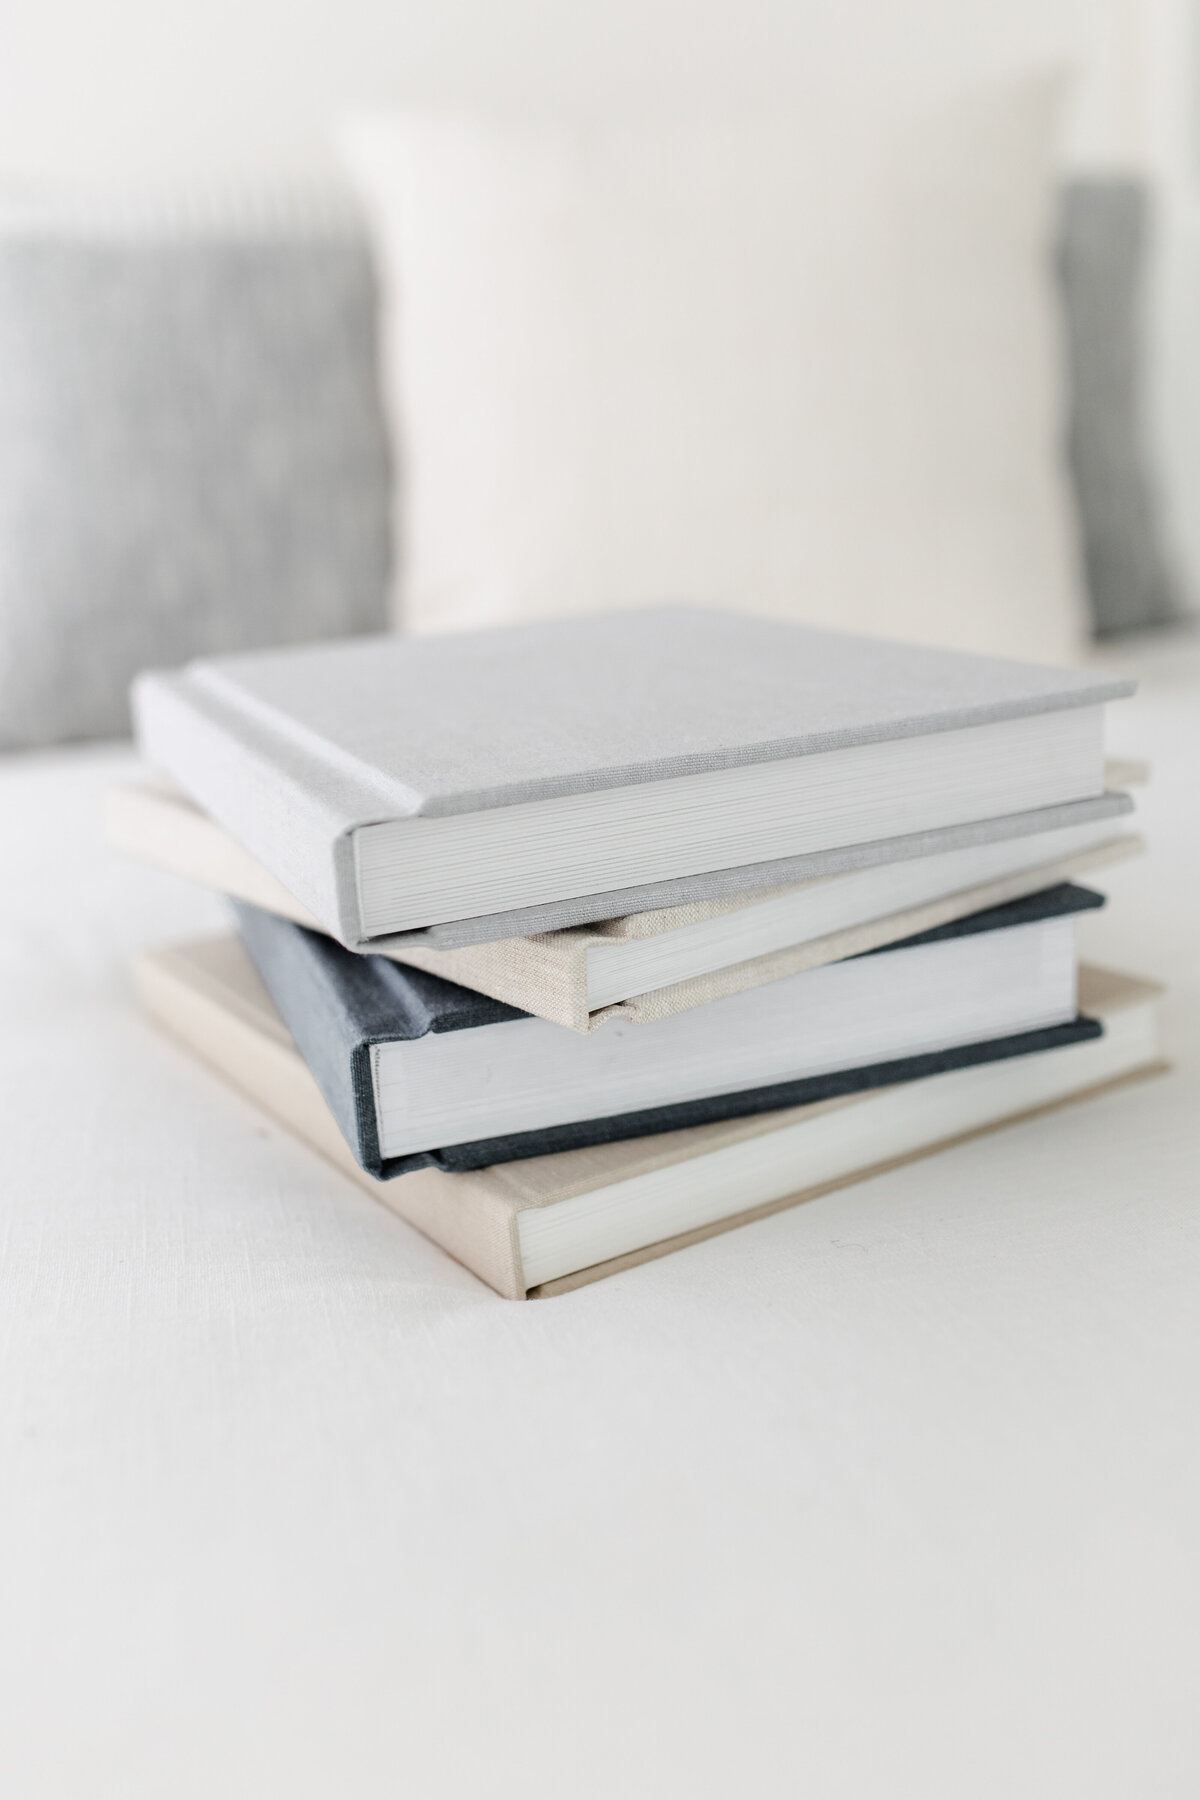 Stack of linen-covered family photo albums